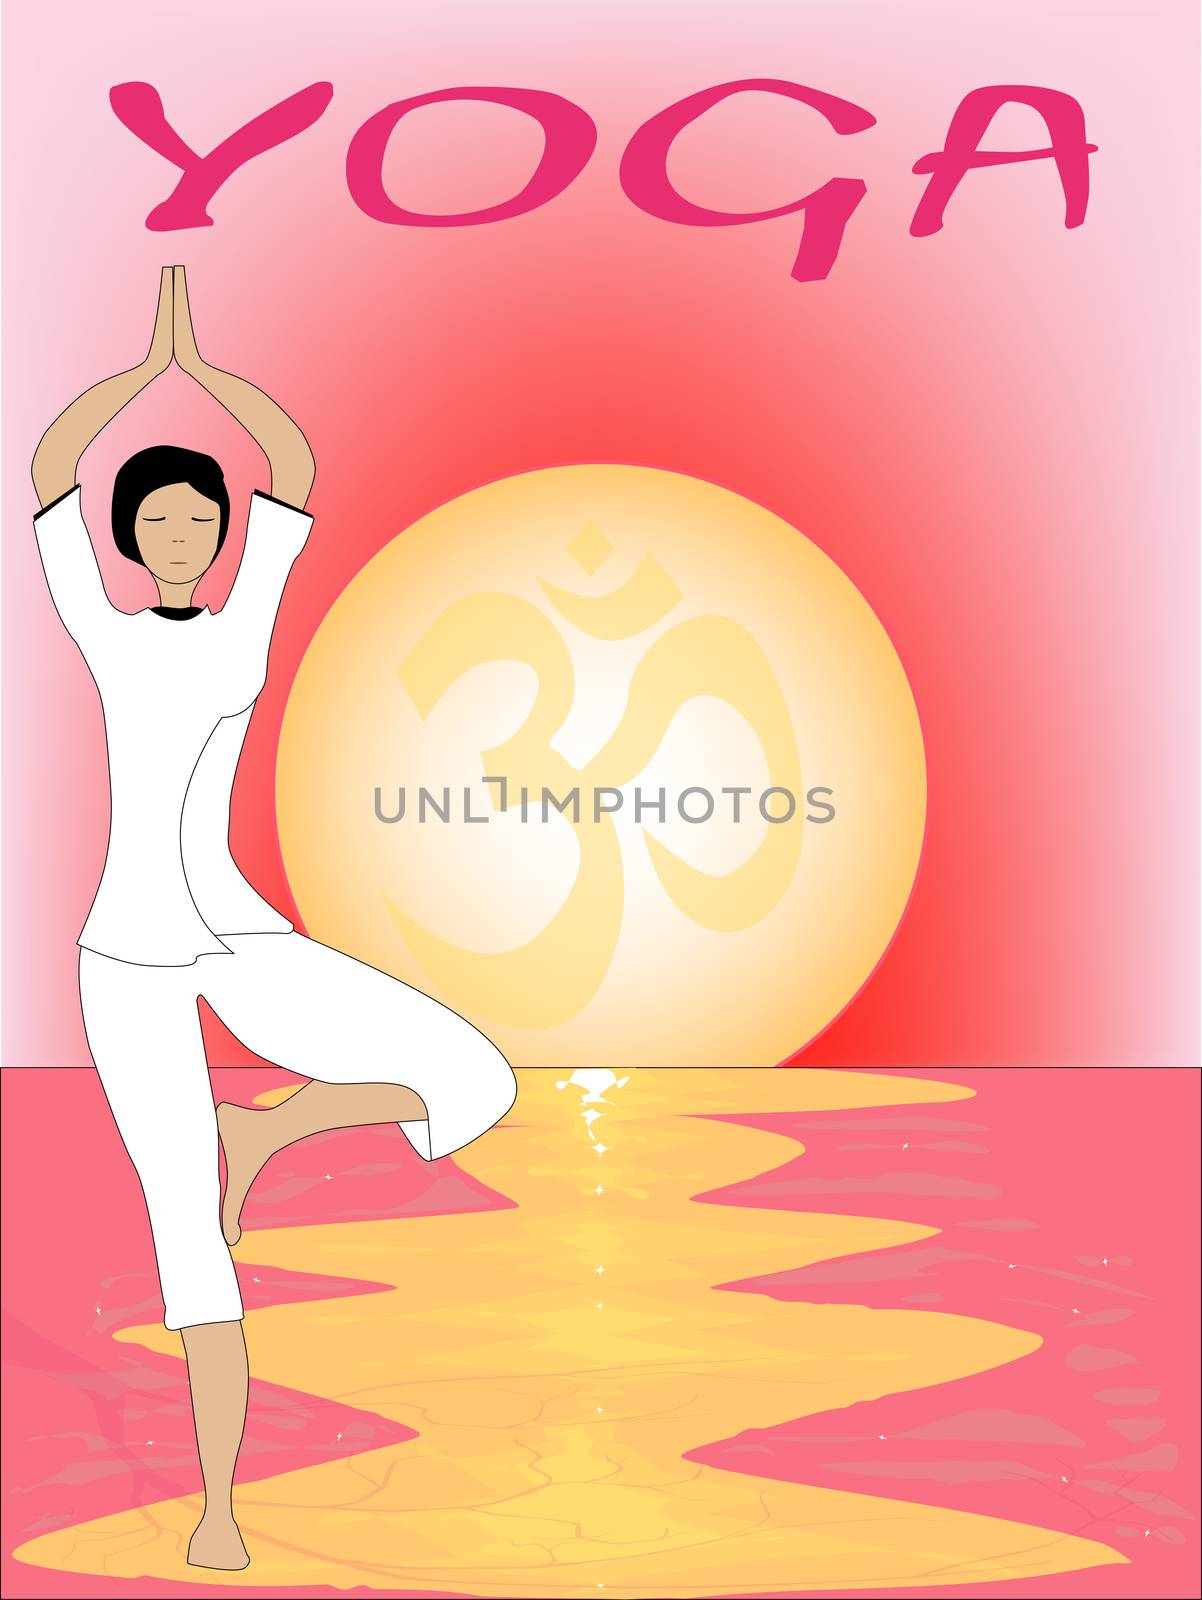 A yoga poster set on a pink oriental sunset.